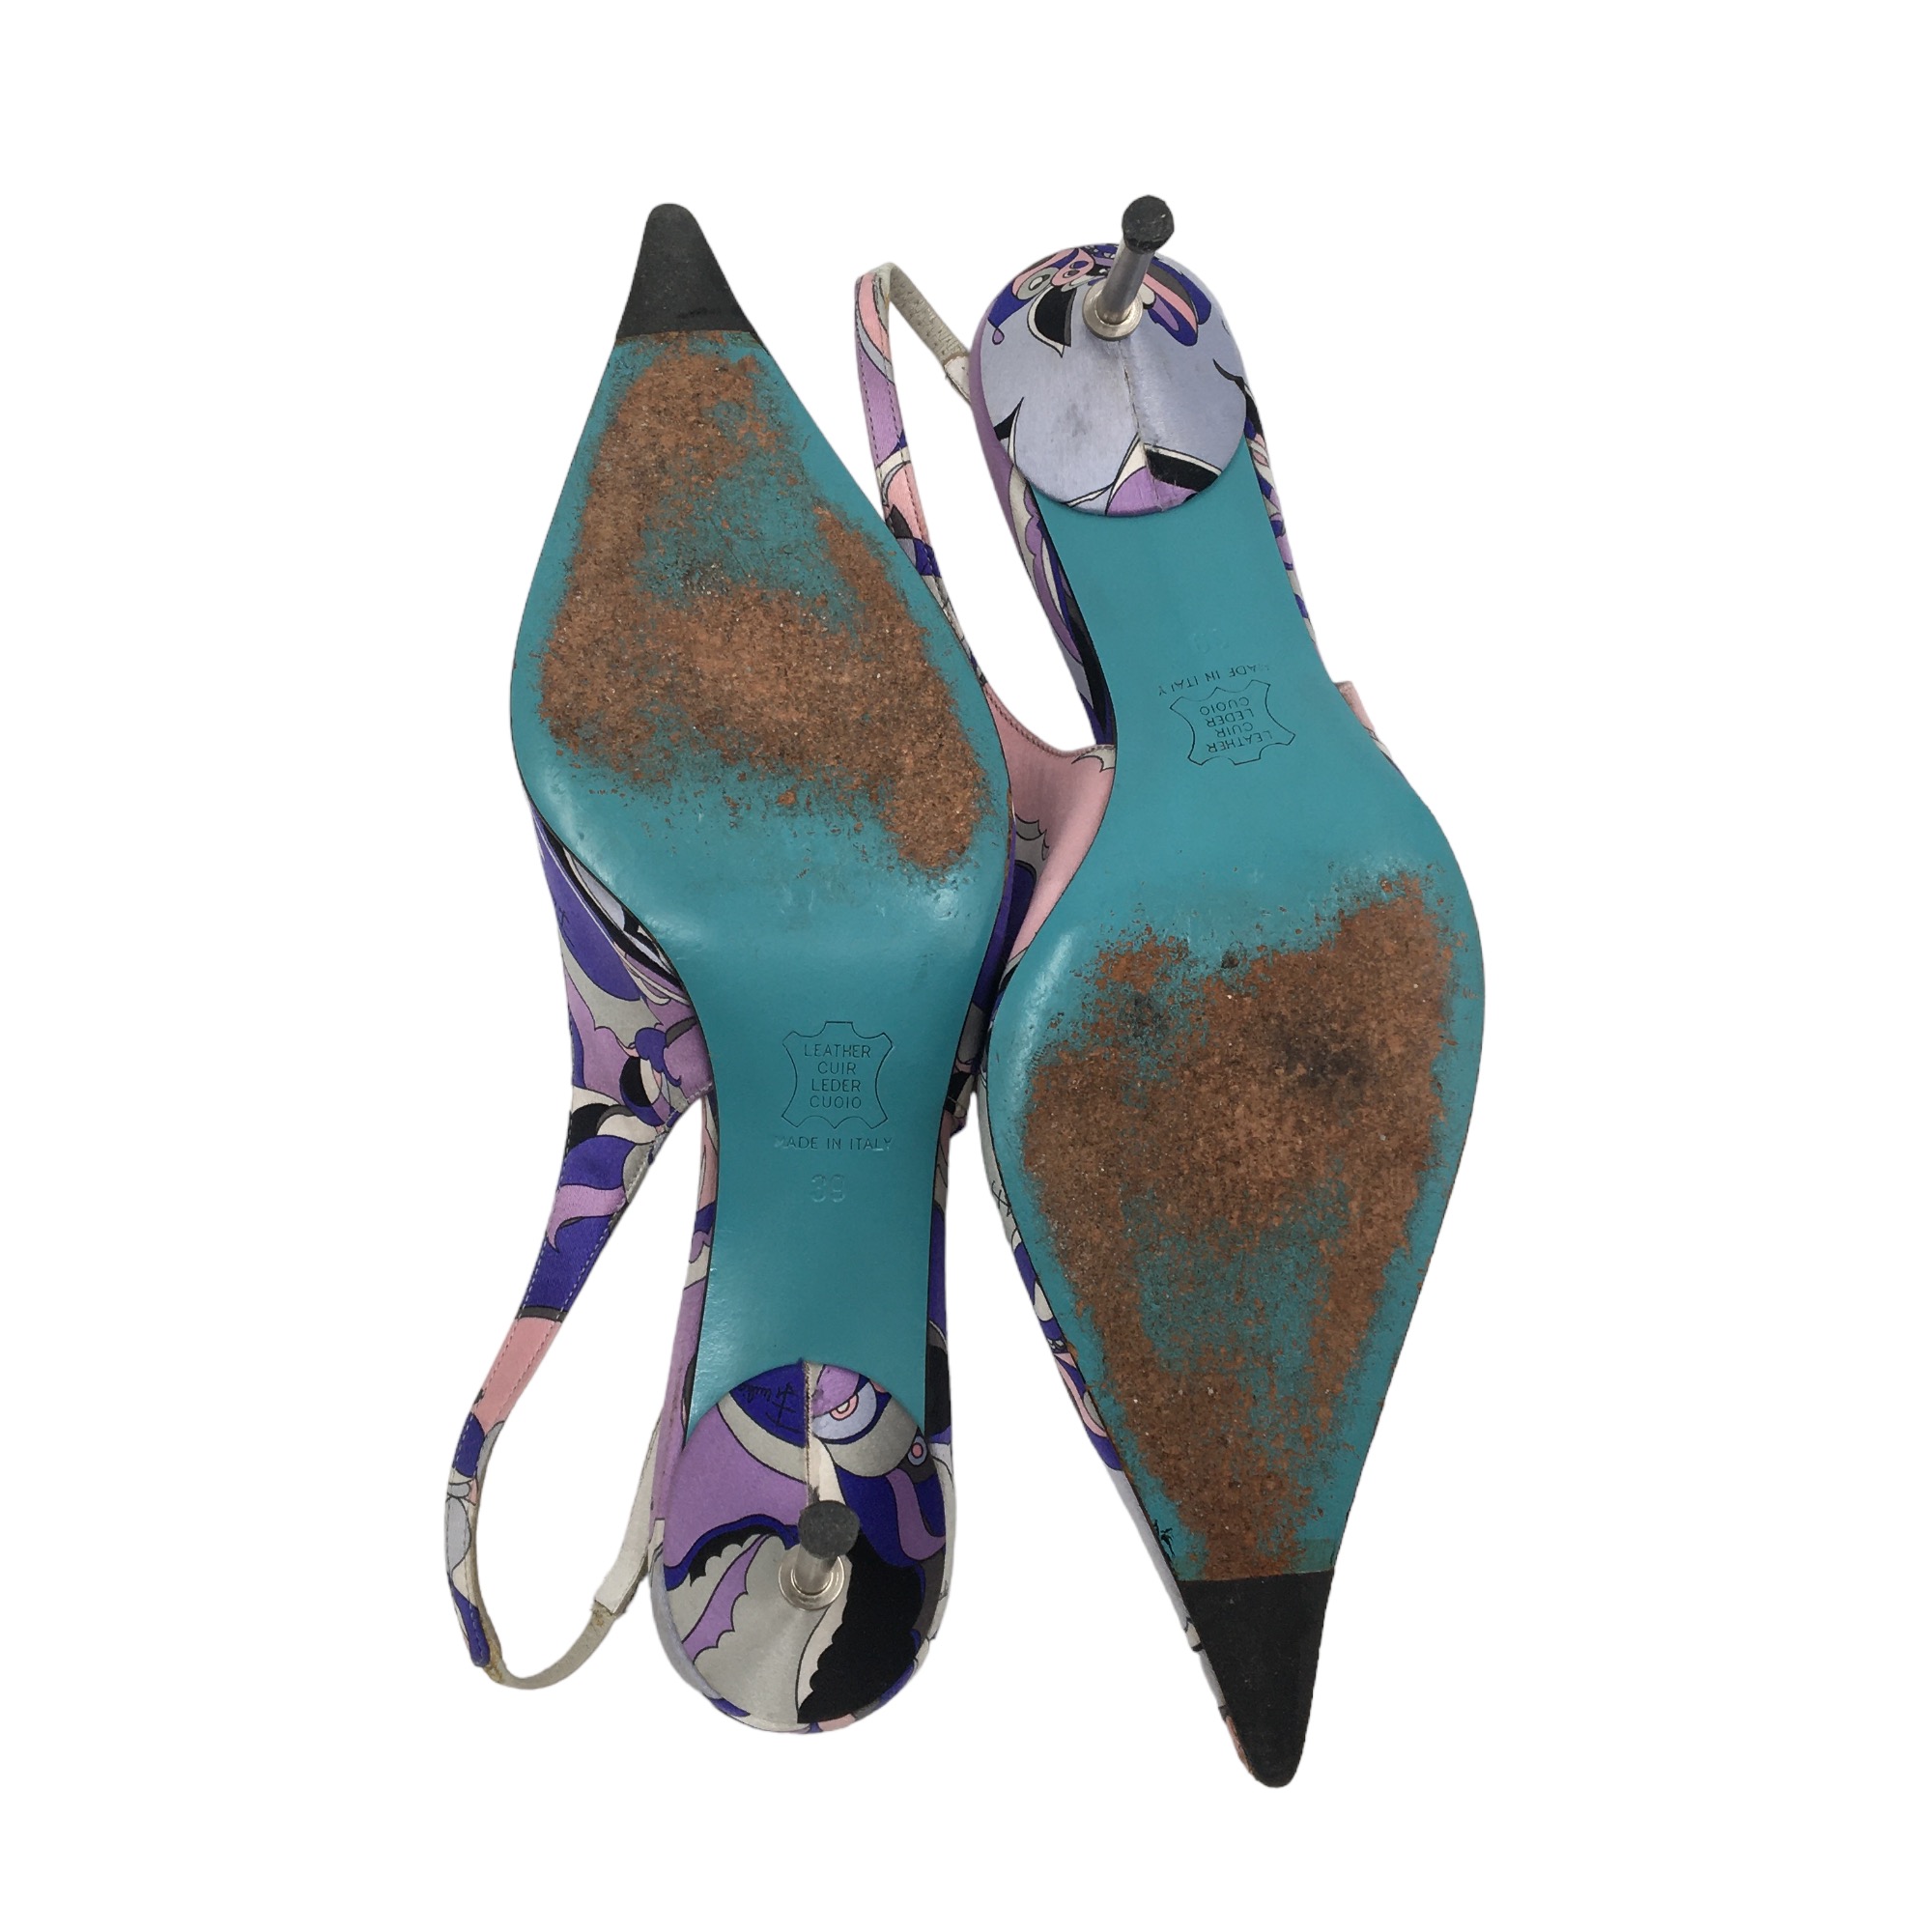 Emilio Pucci vintage slingback shoes in purple swirl print on satin -  DOWNTOWN UPTOWN Genève